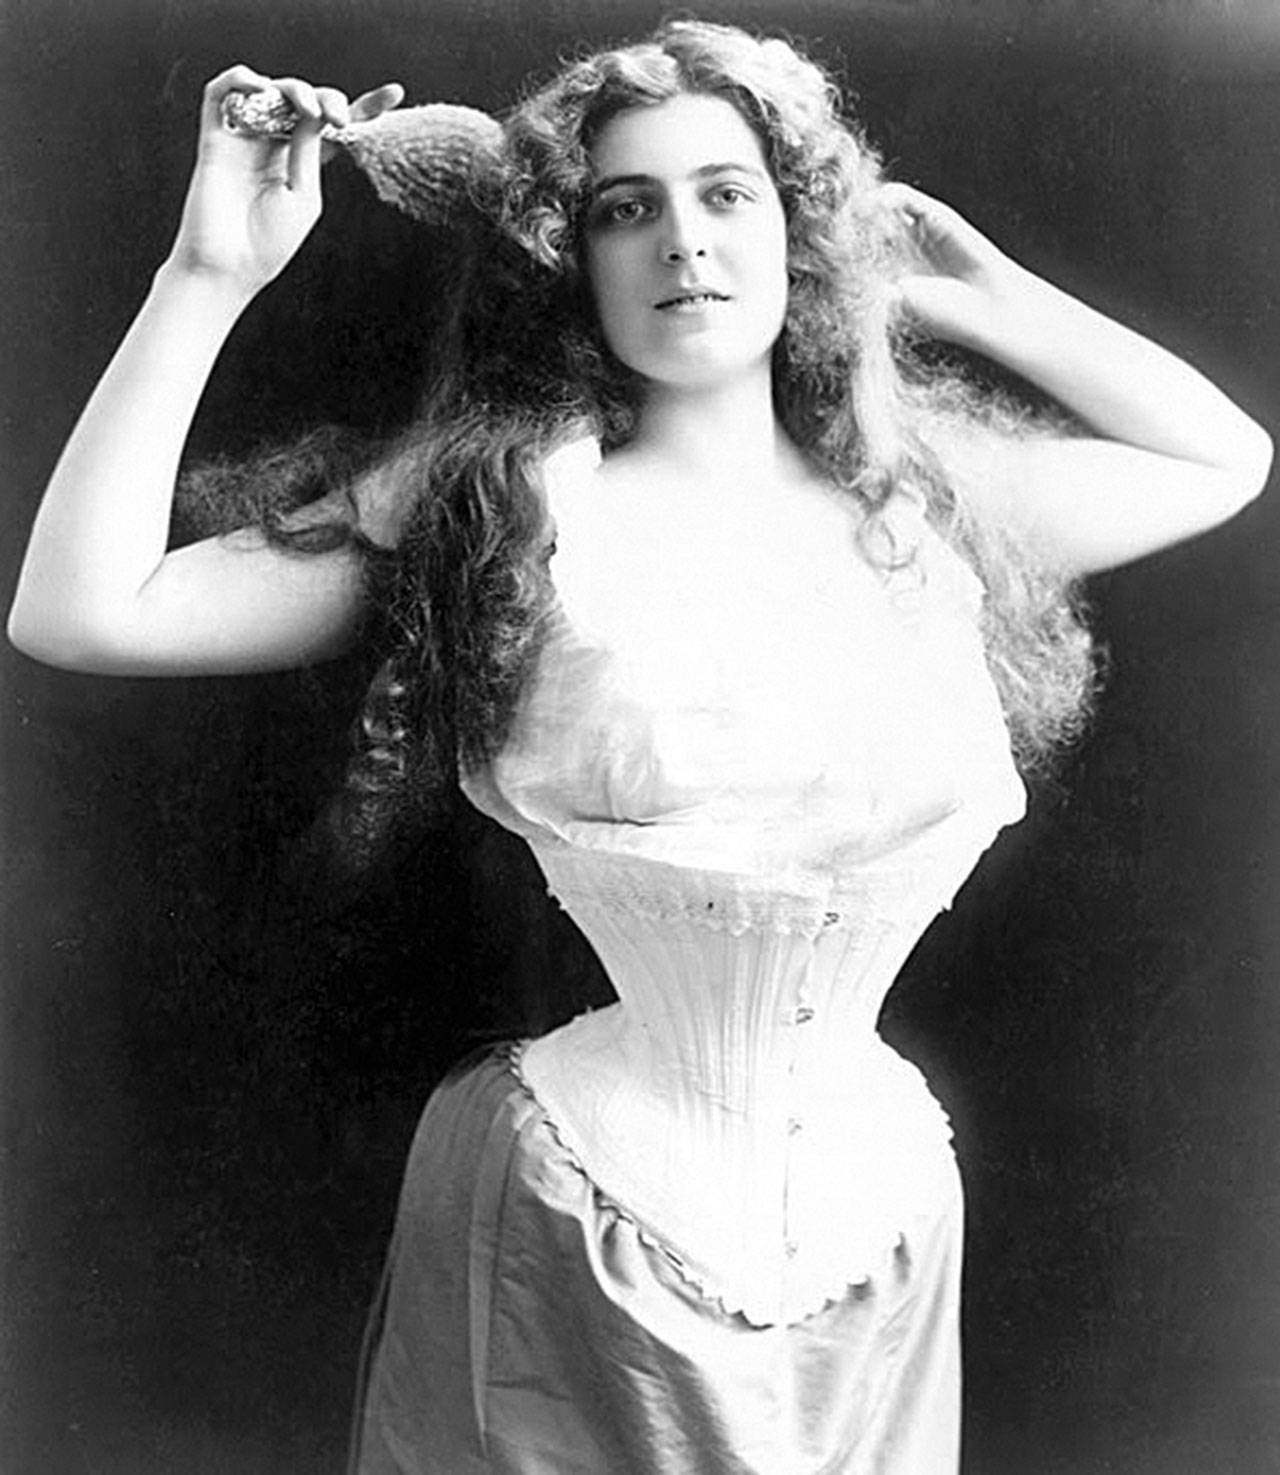 Corsets and bustles were used to give the woman a silhouette and an exaggerated hourglass shape during the late 1800s. Courtesy image, WRVM